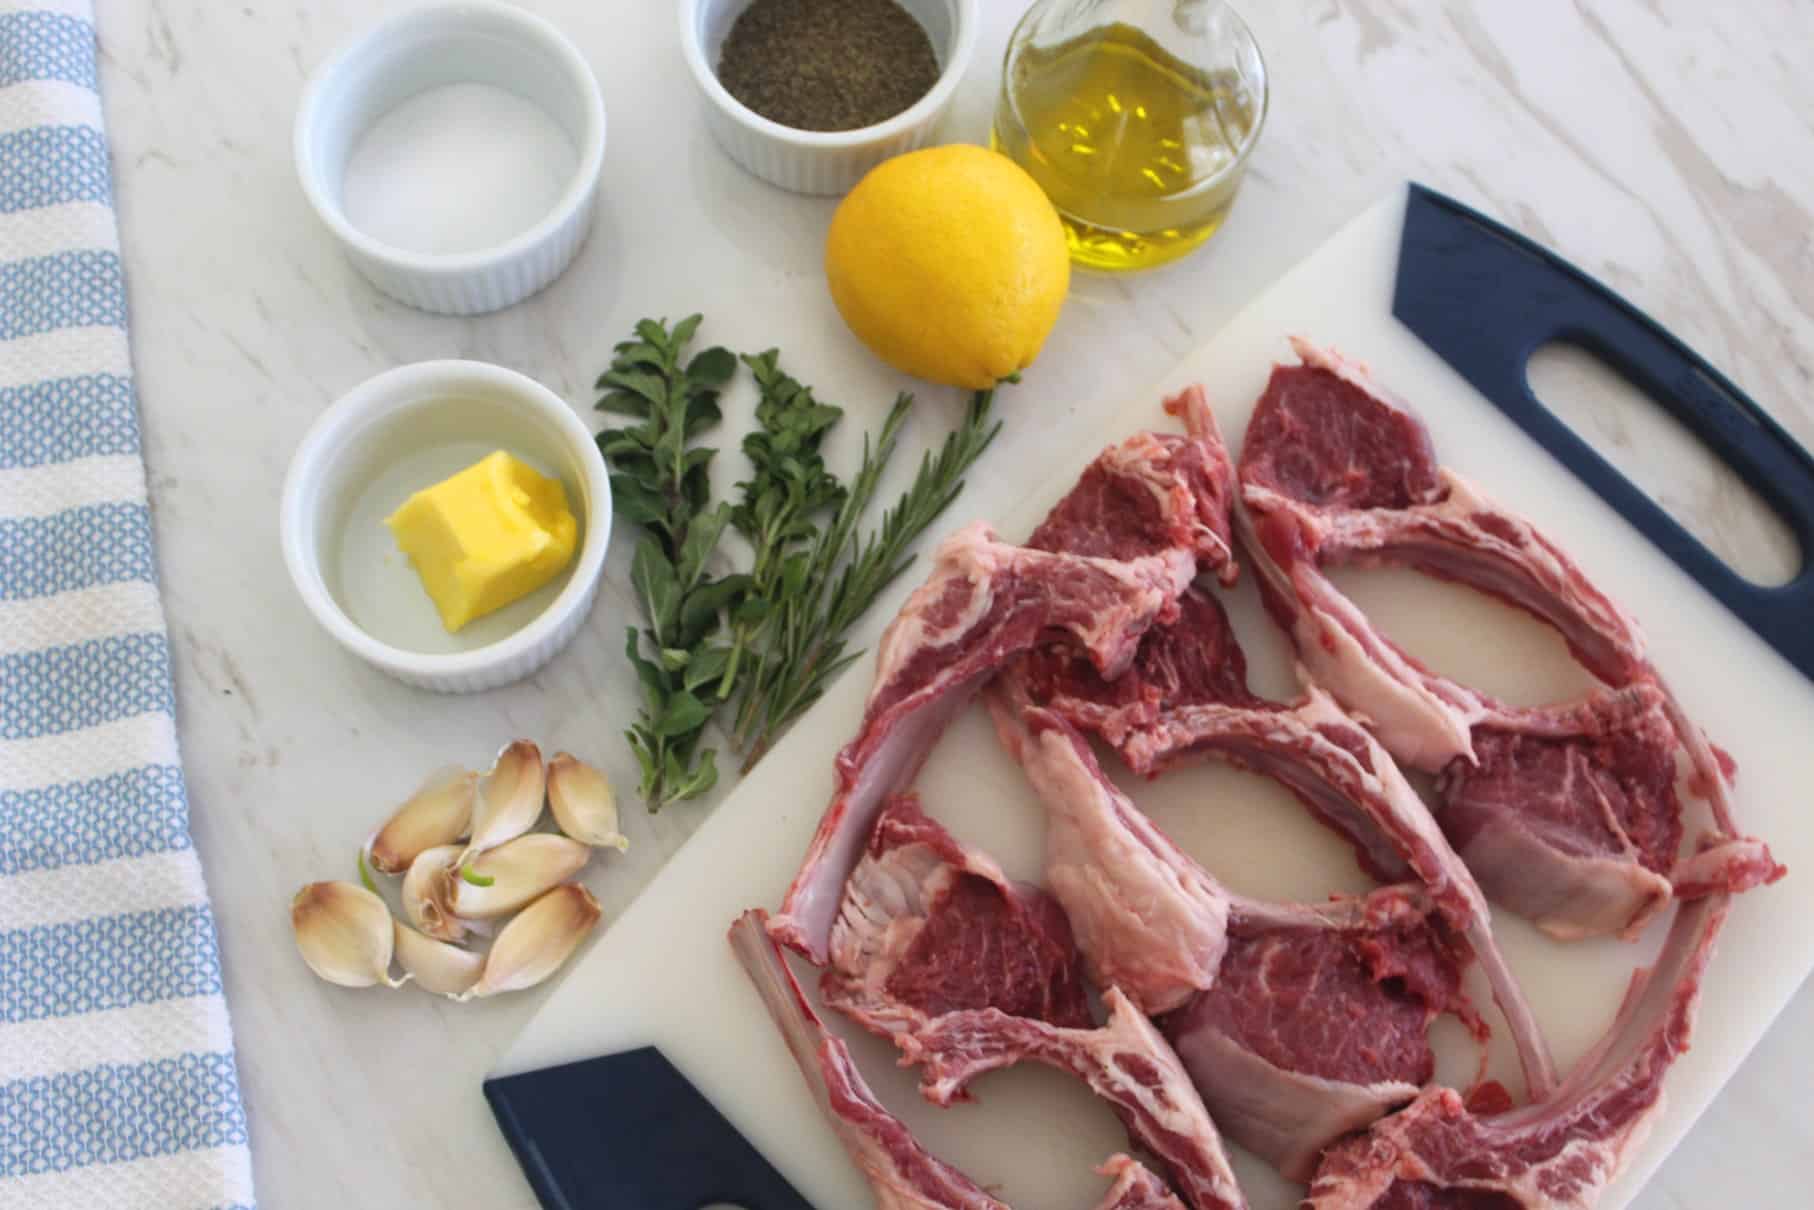 All the ingredients displayed for a visual understanding of what's needed for this recipe. Butter, fresh oregano, fresh rosemary, lemon, olive oil, garlic, lamb chops. 